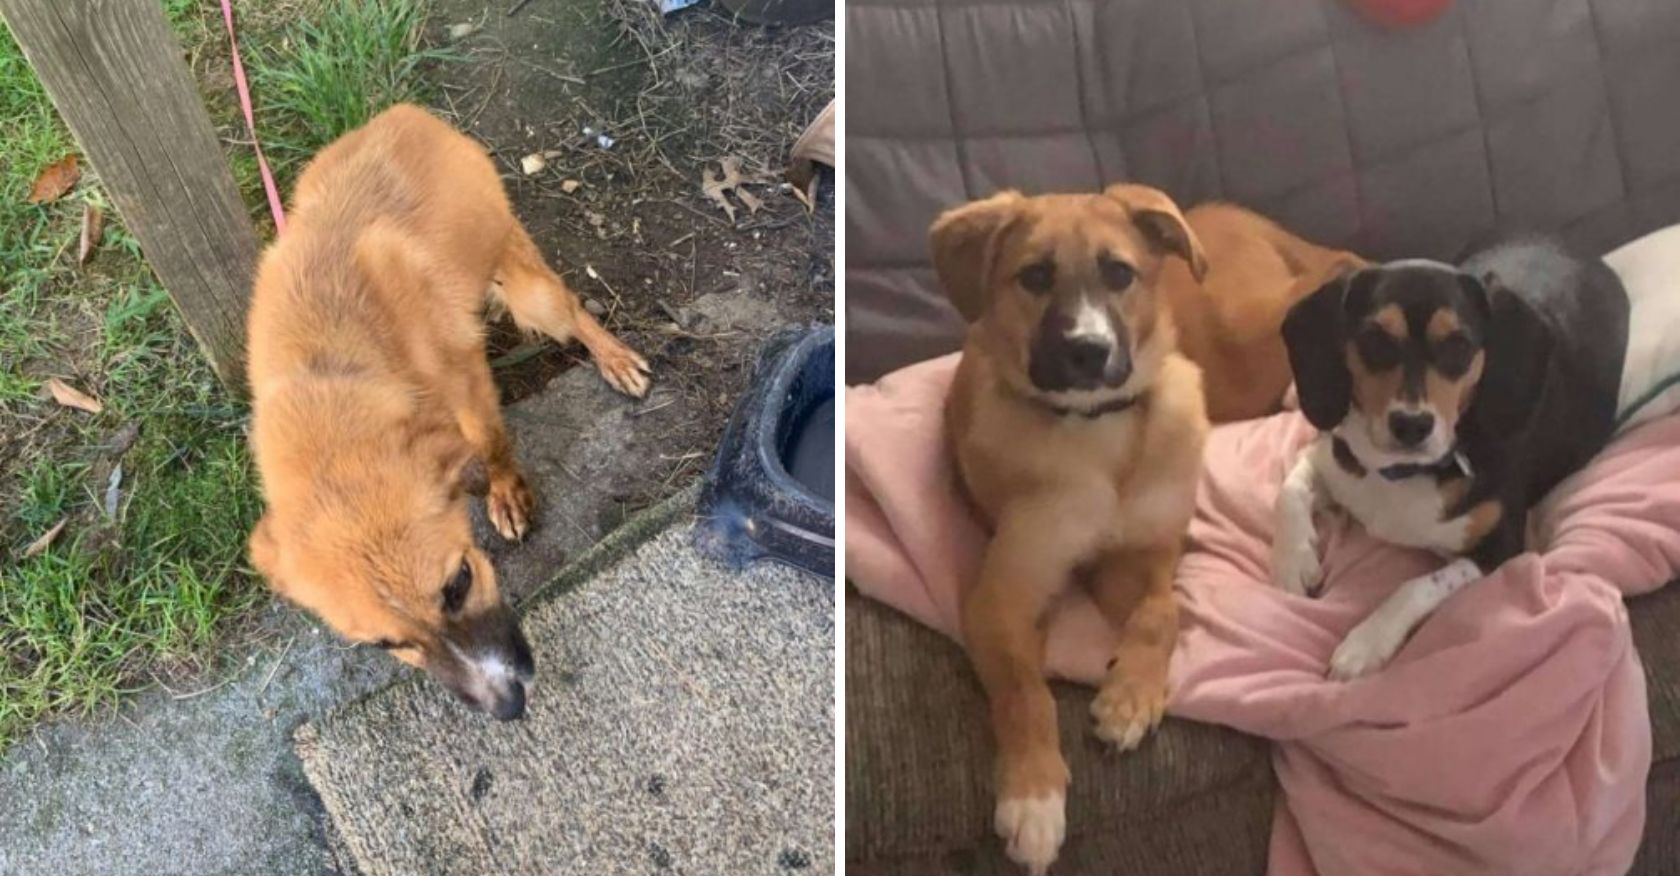 The owner departed, leaving behind a poor dog chained on the porch without food or water. An act of cruelty that calls for intervention and compassion.